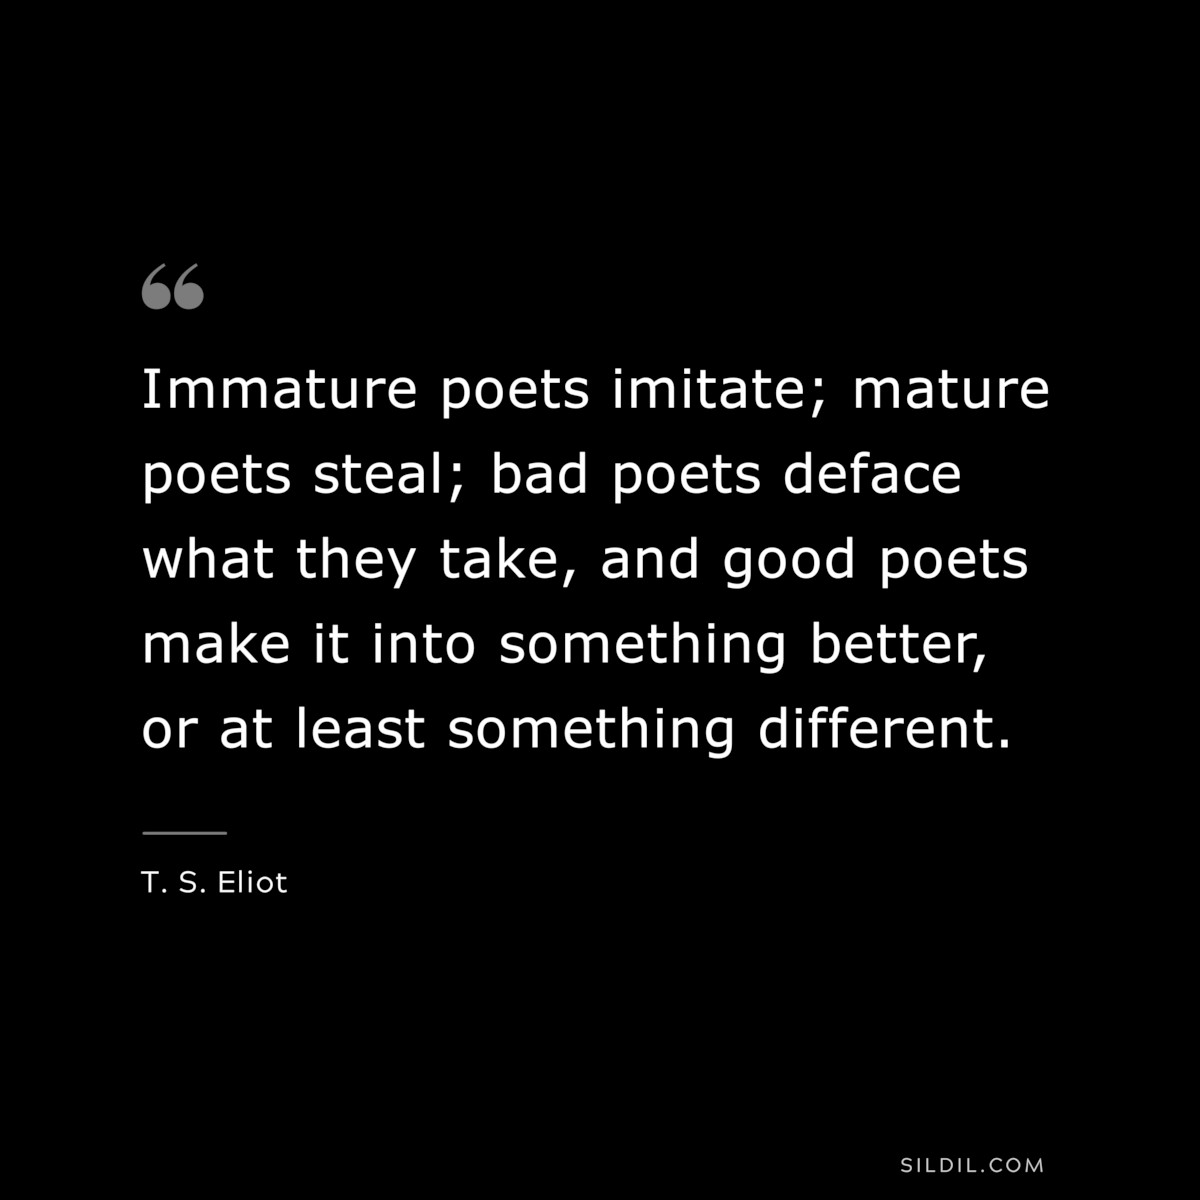 Immature poets imitate; mature poets steal; bad poets deface what they take, and good poets make it into something better, or at least something different. ― T. S. Eliot